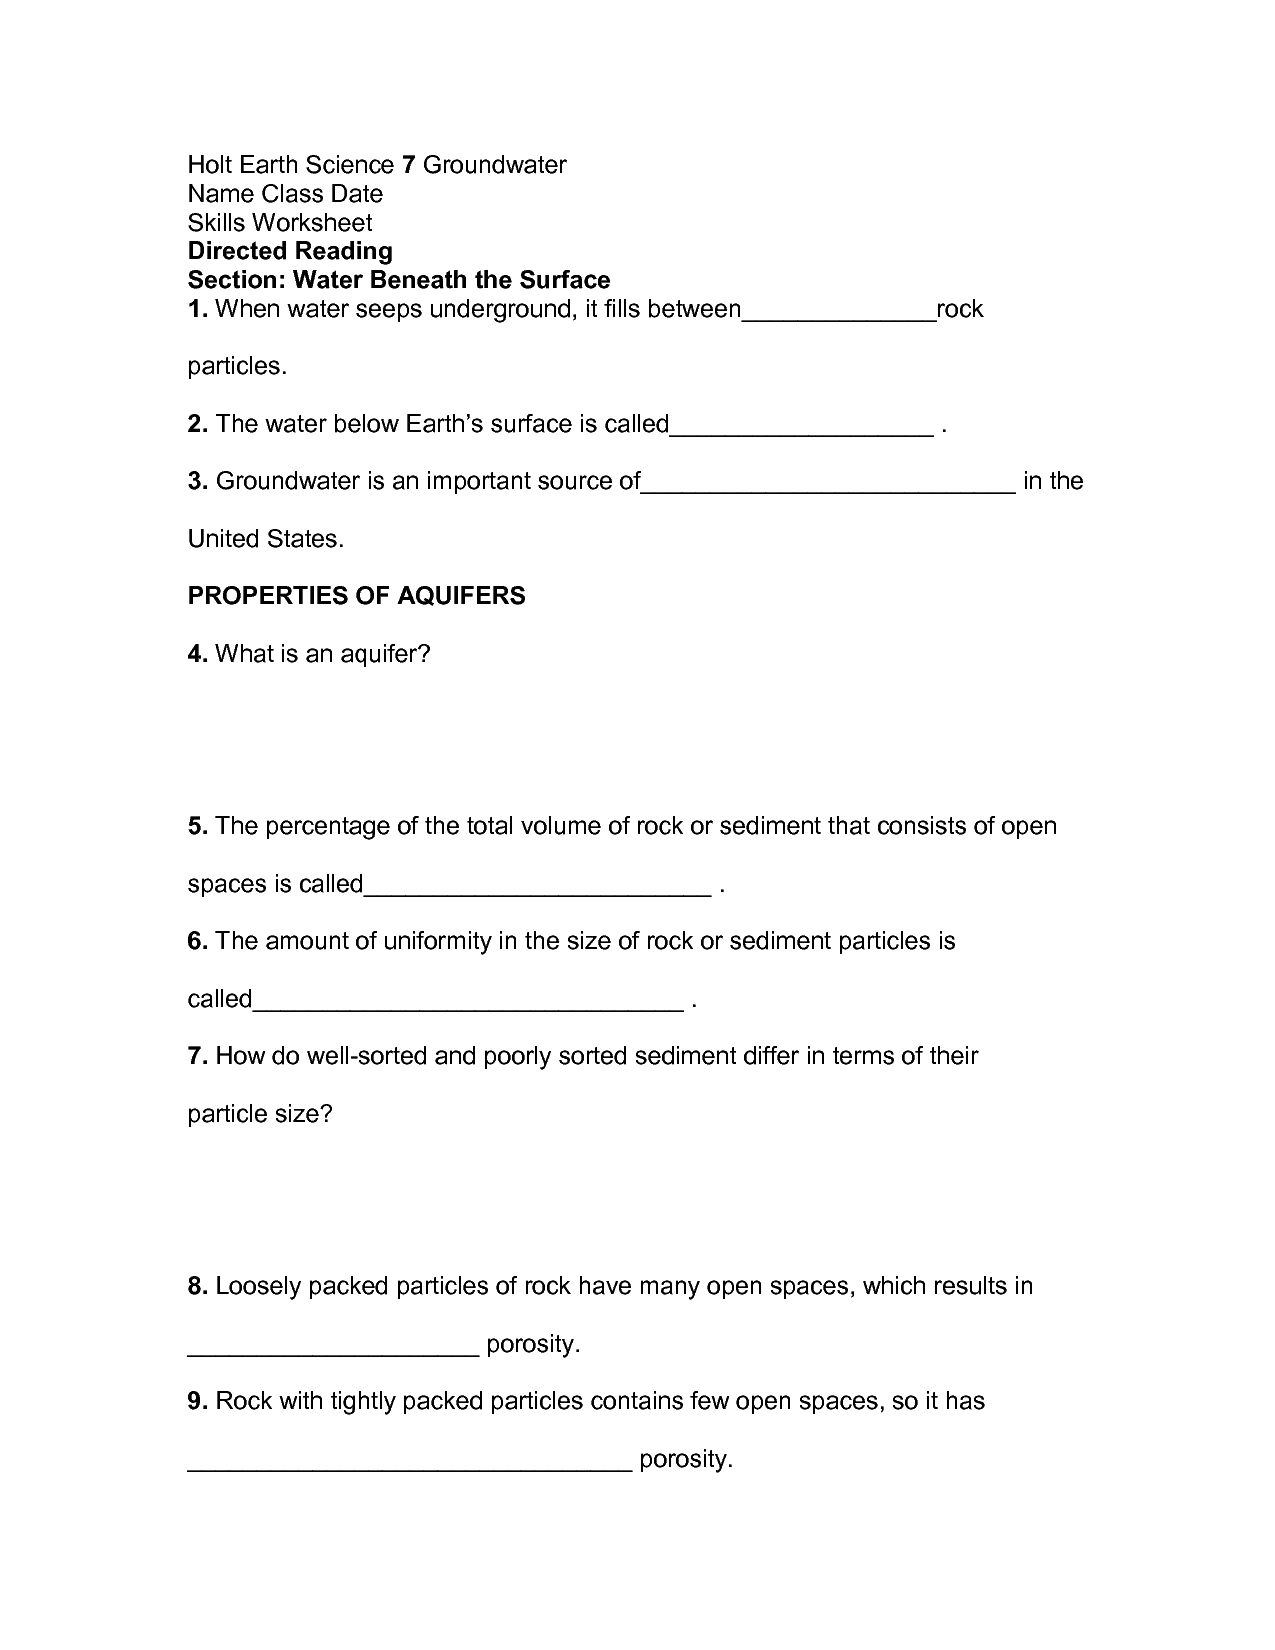 Holt Earth Science Worksheets Answers Image